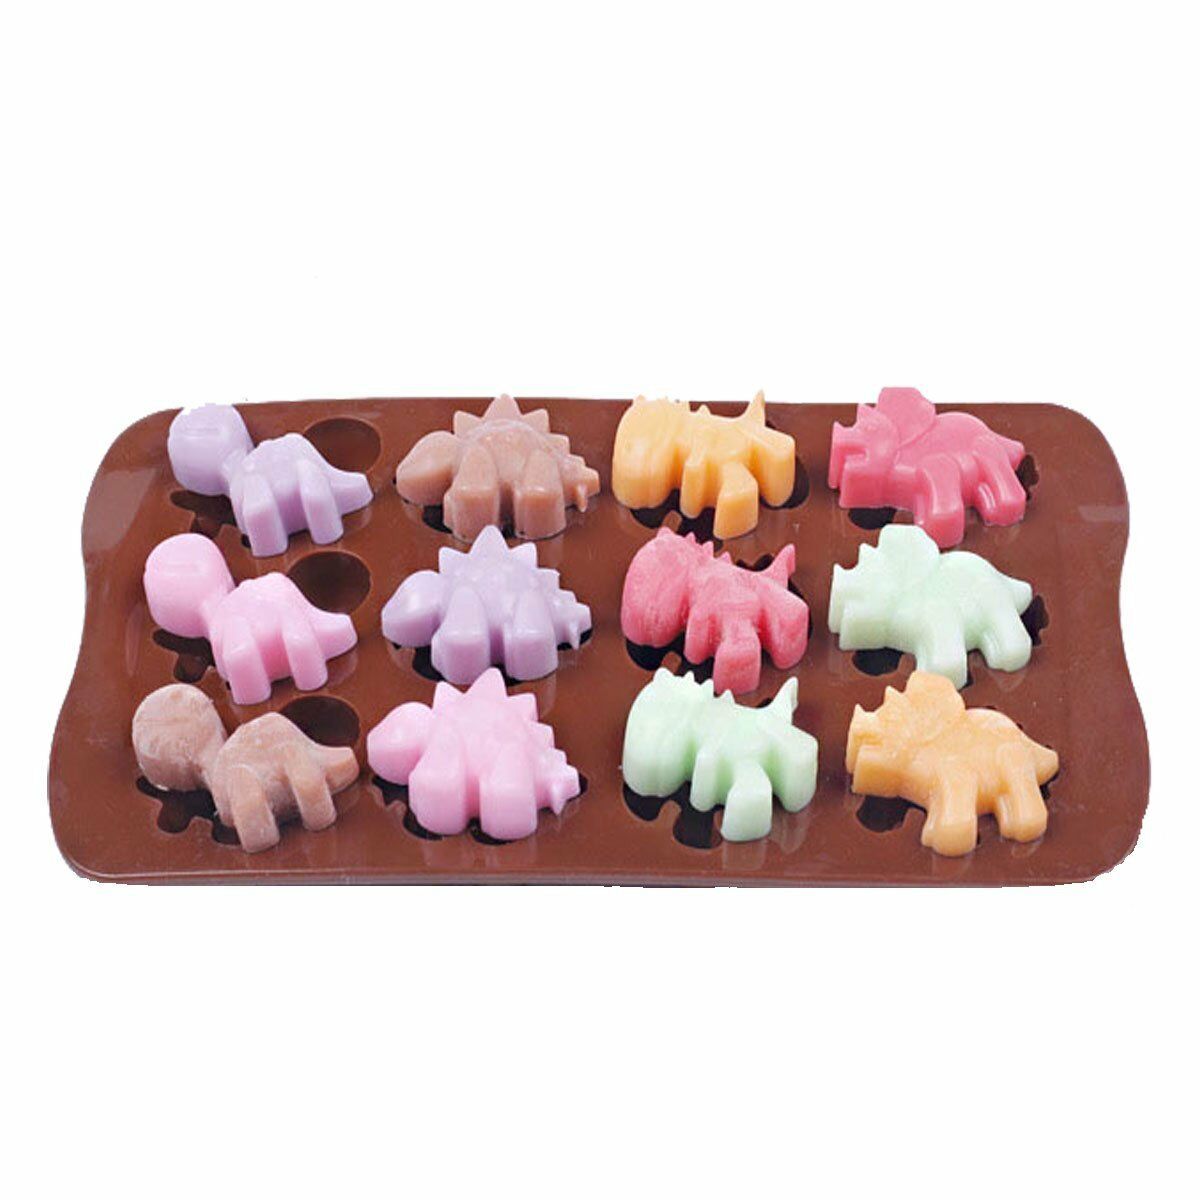 Silicone Mold Chocolate Ice Cube Tray Fondant Molds Diy Soap Mould Jello Candy